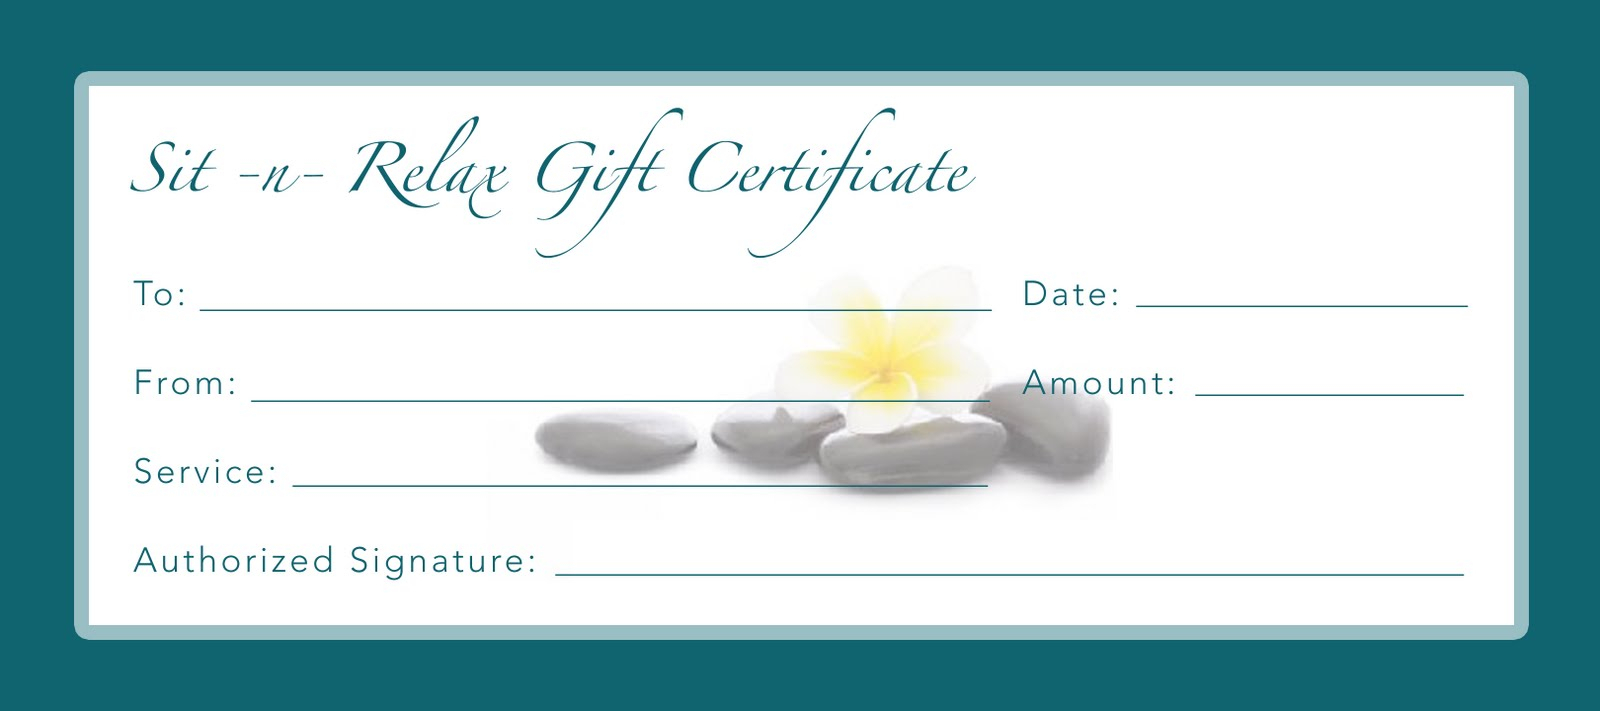 Free Spa Gift Certificate Template Printable Inside Nail Gift Certificate Template Free